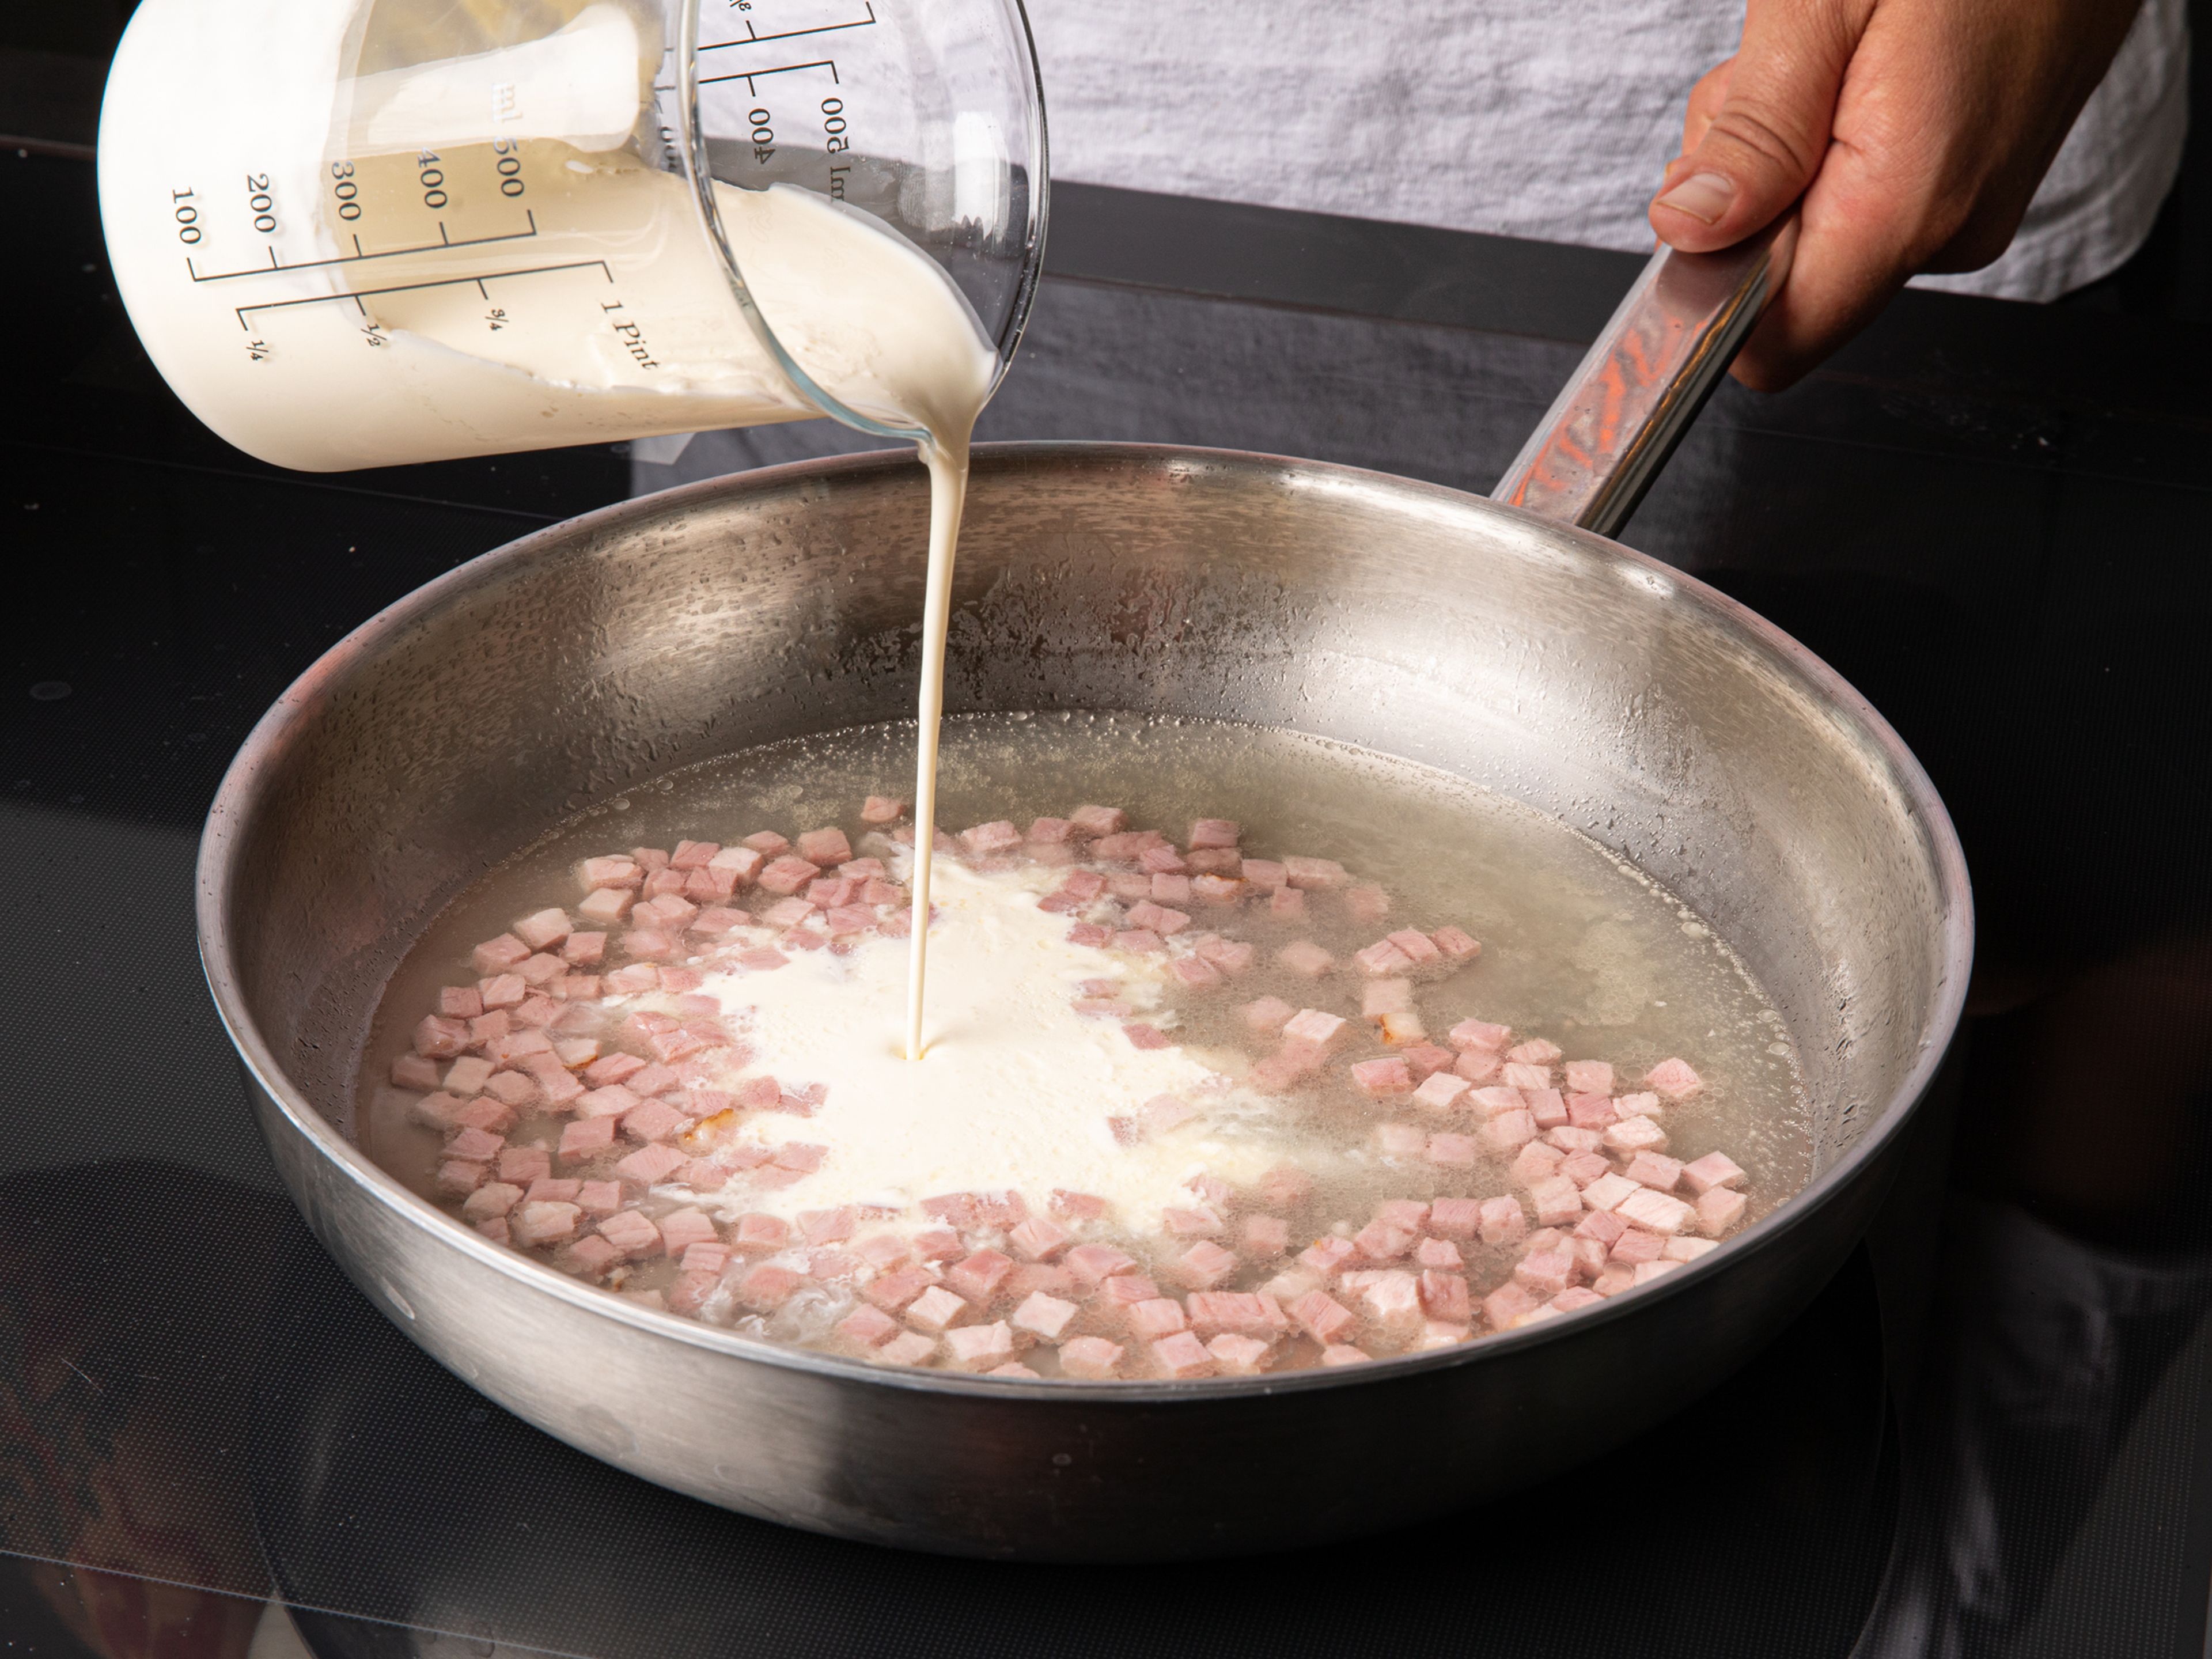 In a large frying pan, add oil and diced ham. Fry briefly, then deglaze with vegetable stock and cream and let simmer for approx. 5 min.